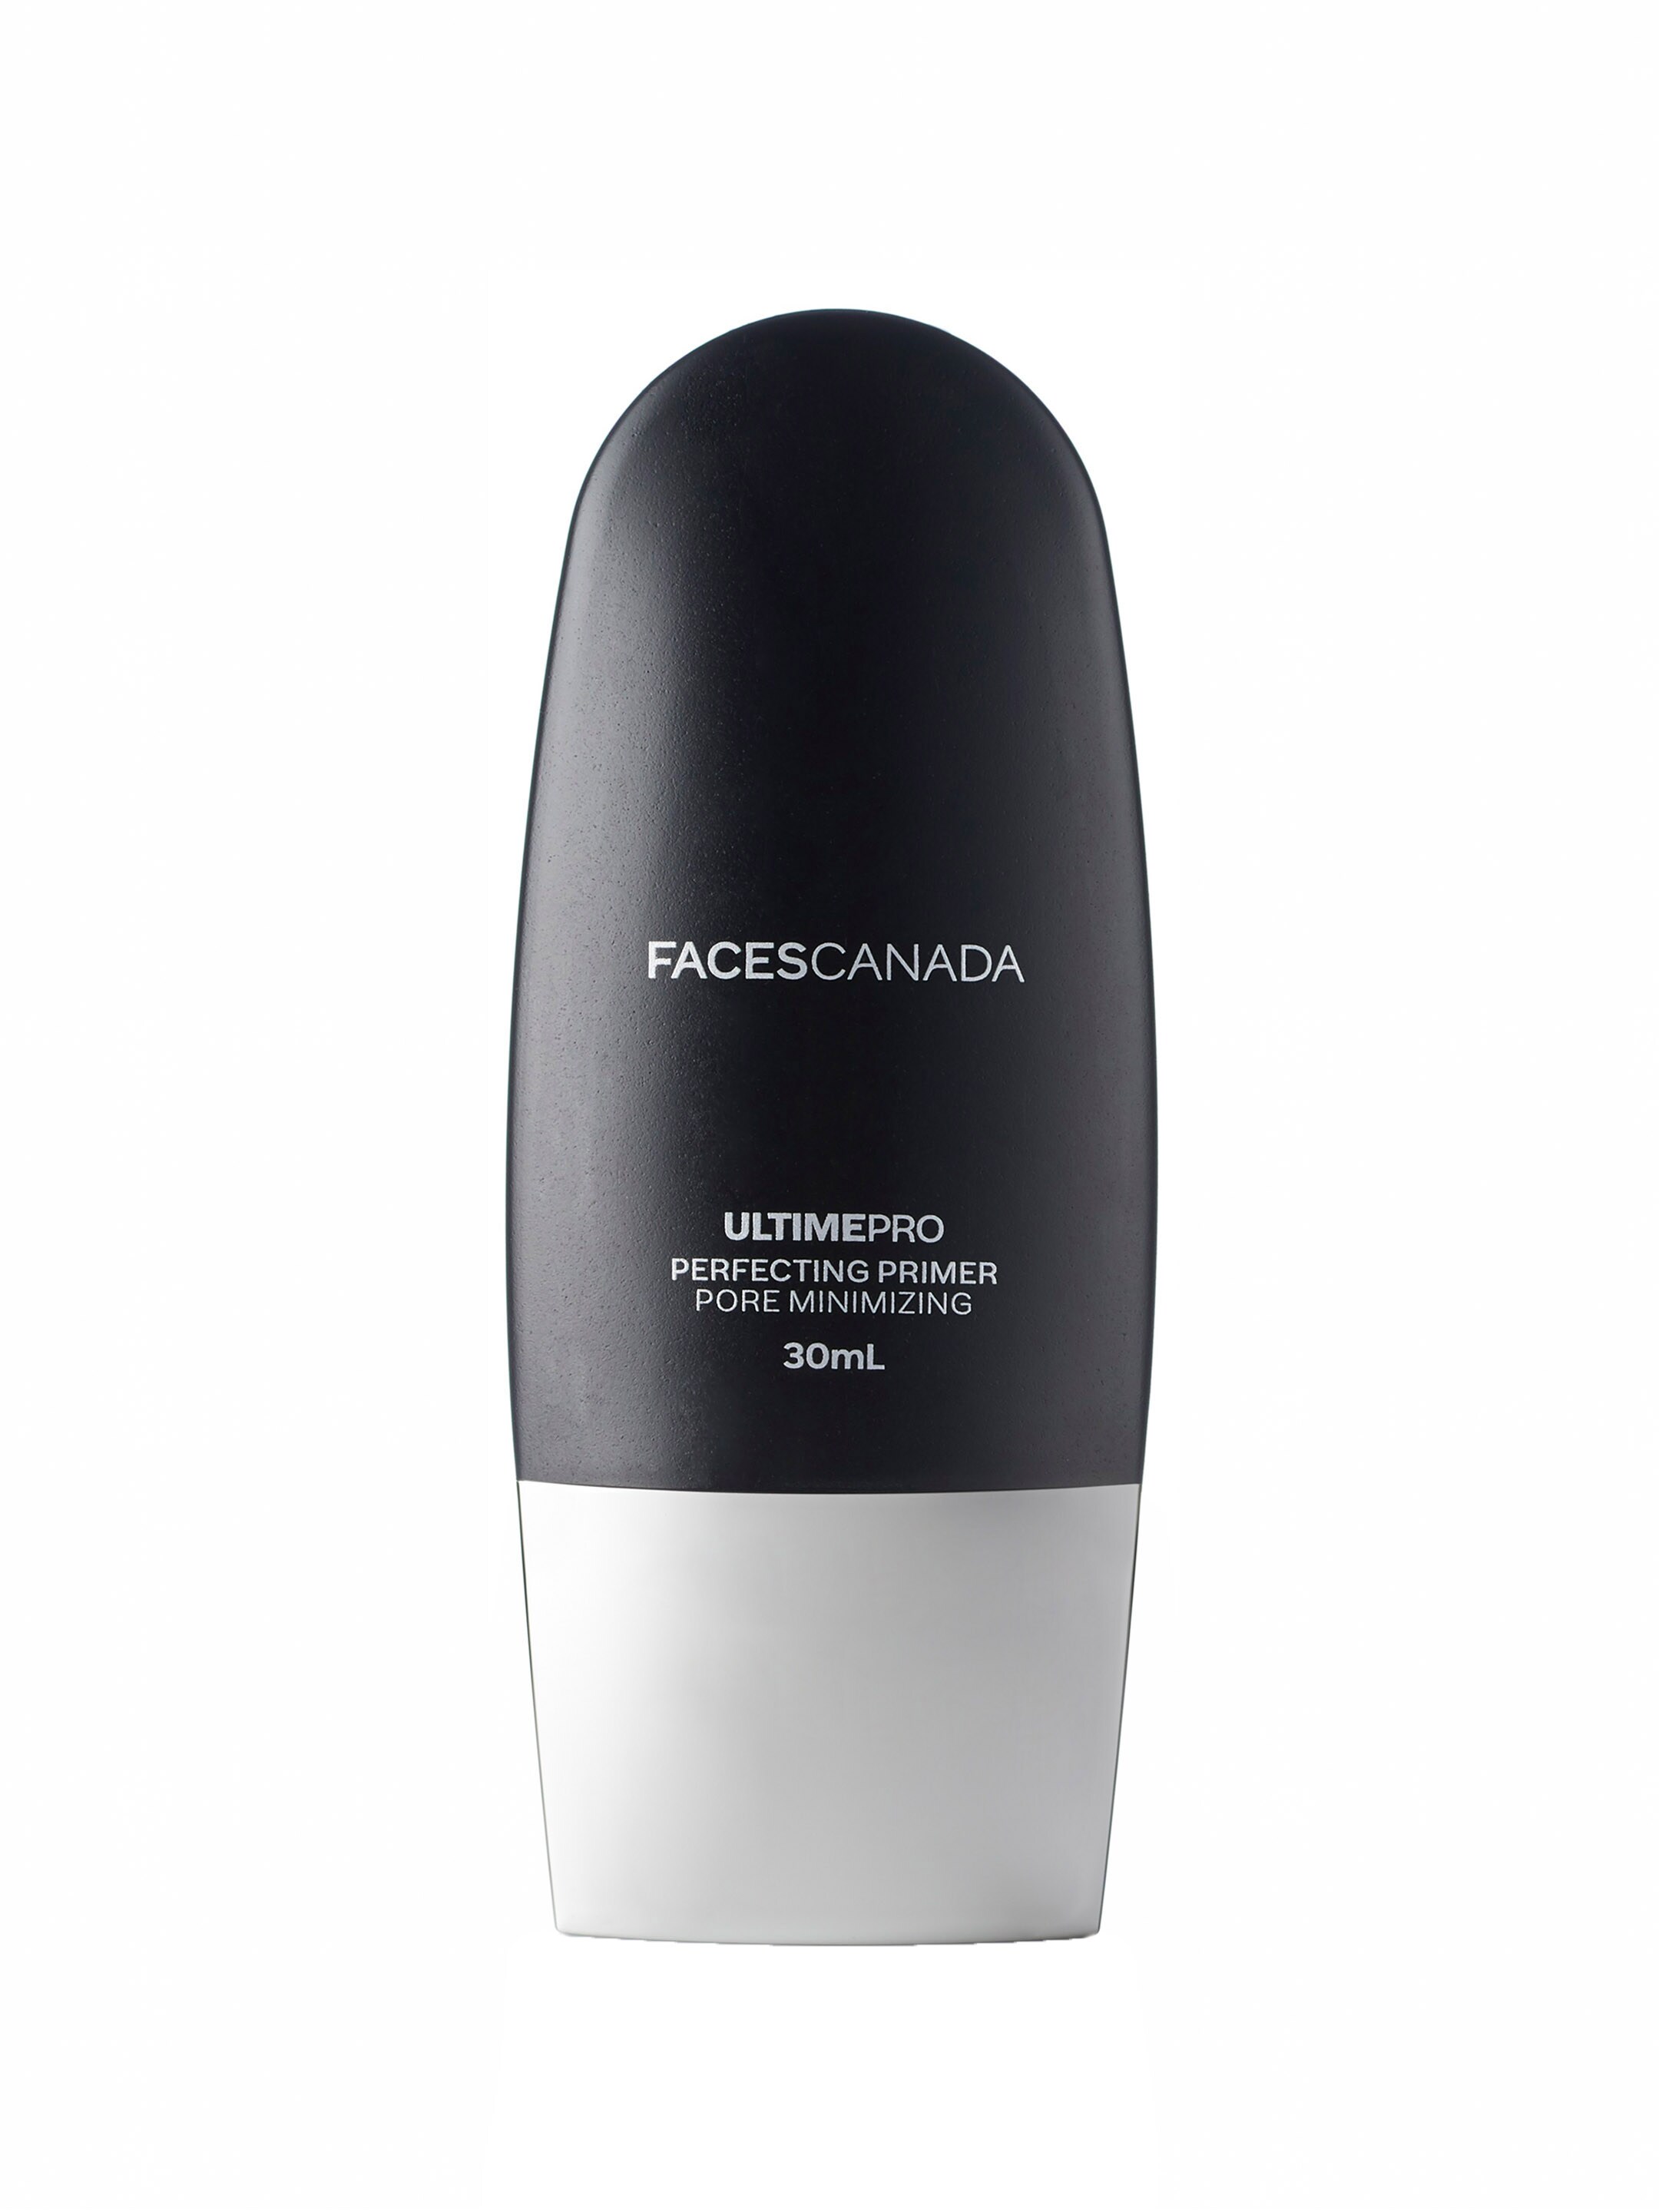 FACES CANADA Ultime Pro Perfecting Primer 30ml Price in India